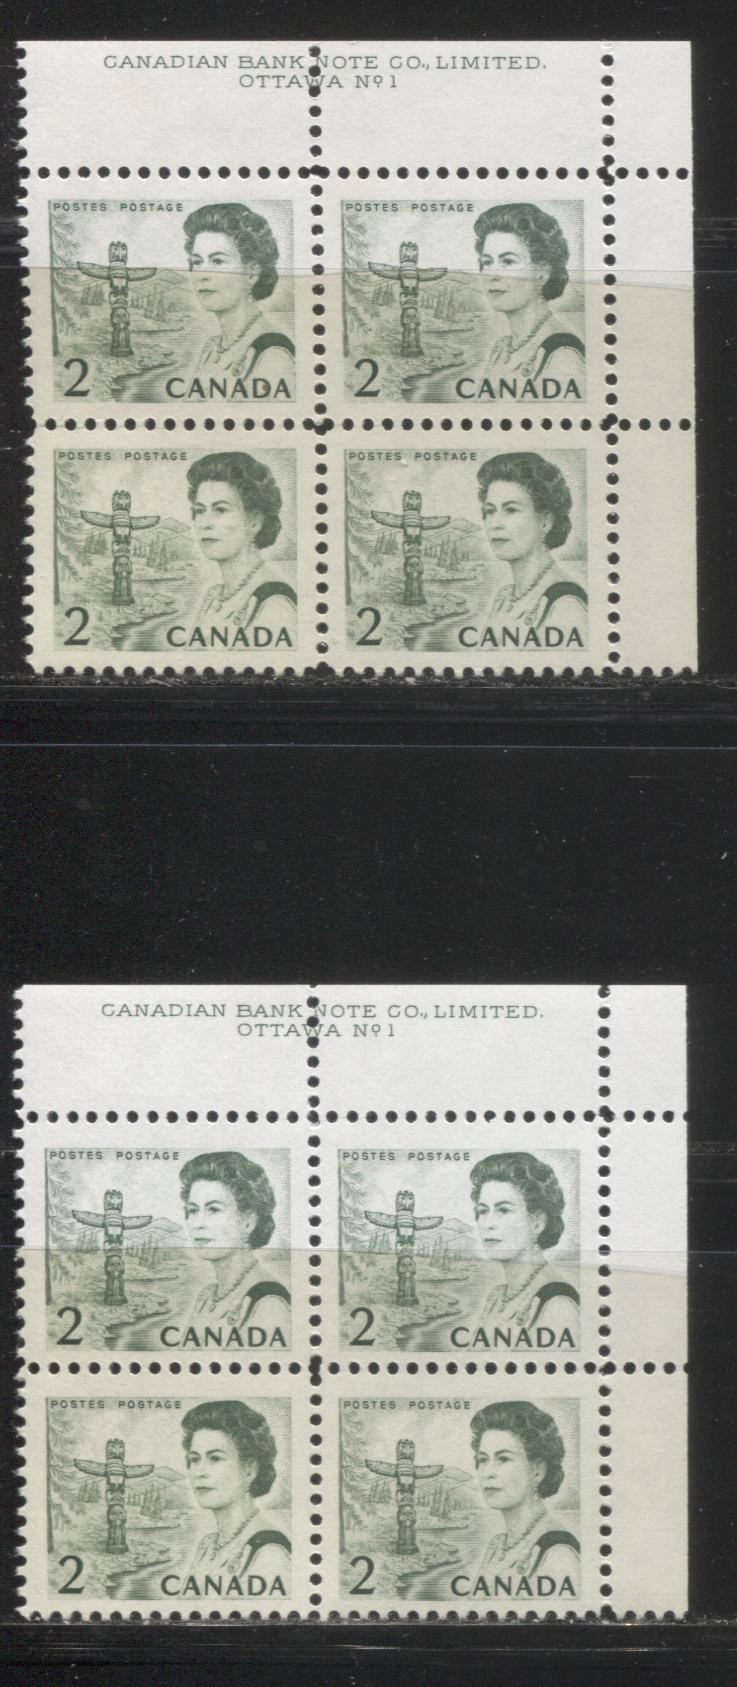 Lot #166 Canada #455ii 2c Bright Green, Pacific Coast Totem Pole, 1967-1973 Centennial Issue, Two VFNH UR Plate 1 Blocks on Two Different LF-fl Papers, PVA Gum